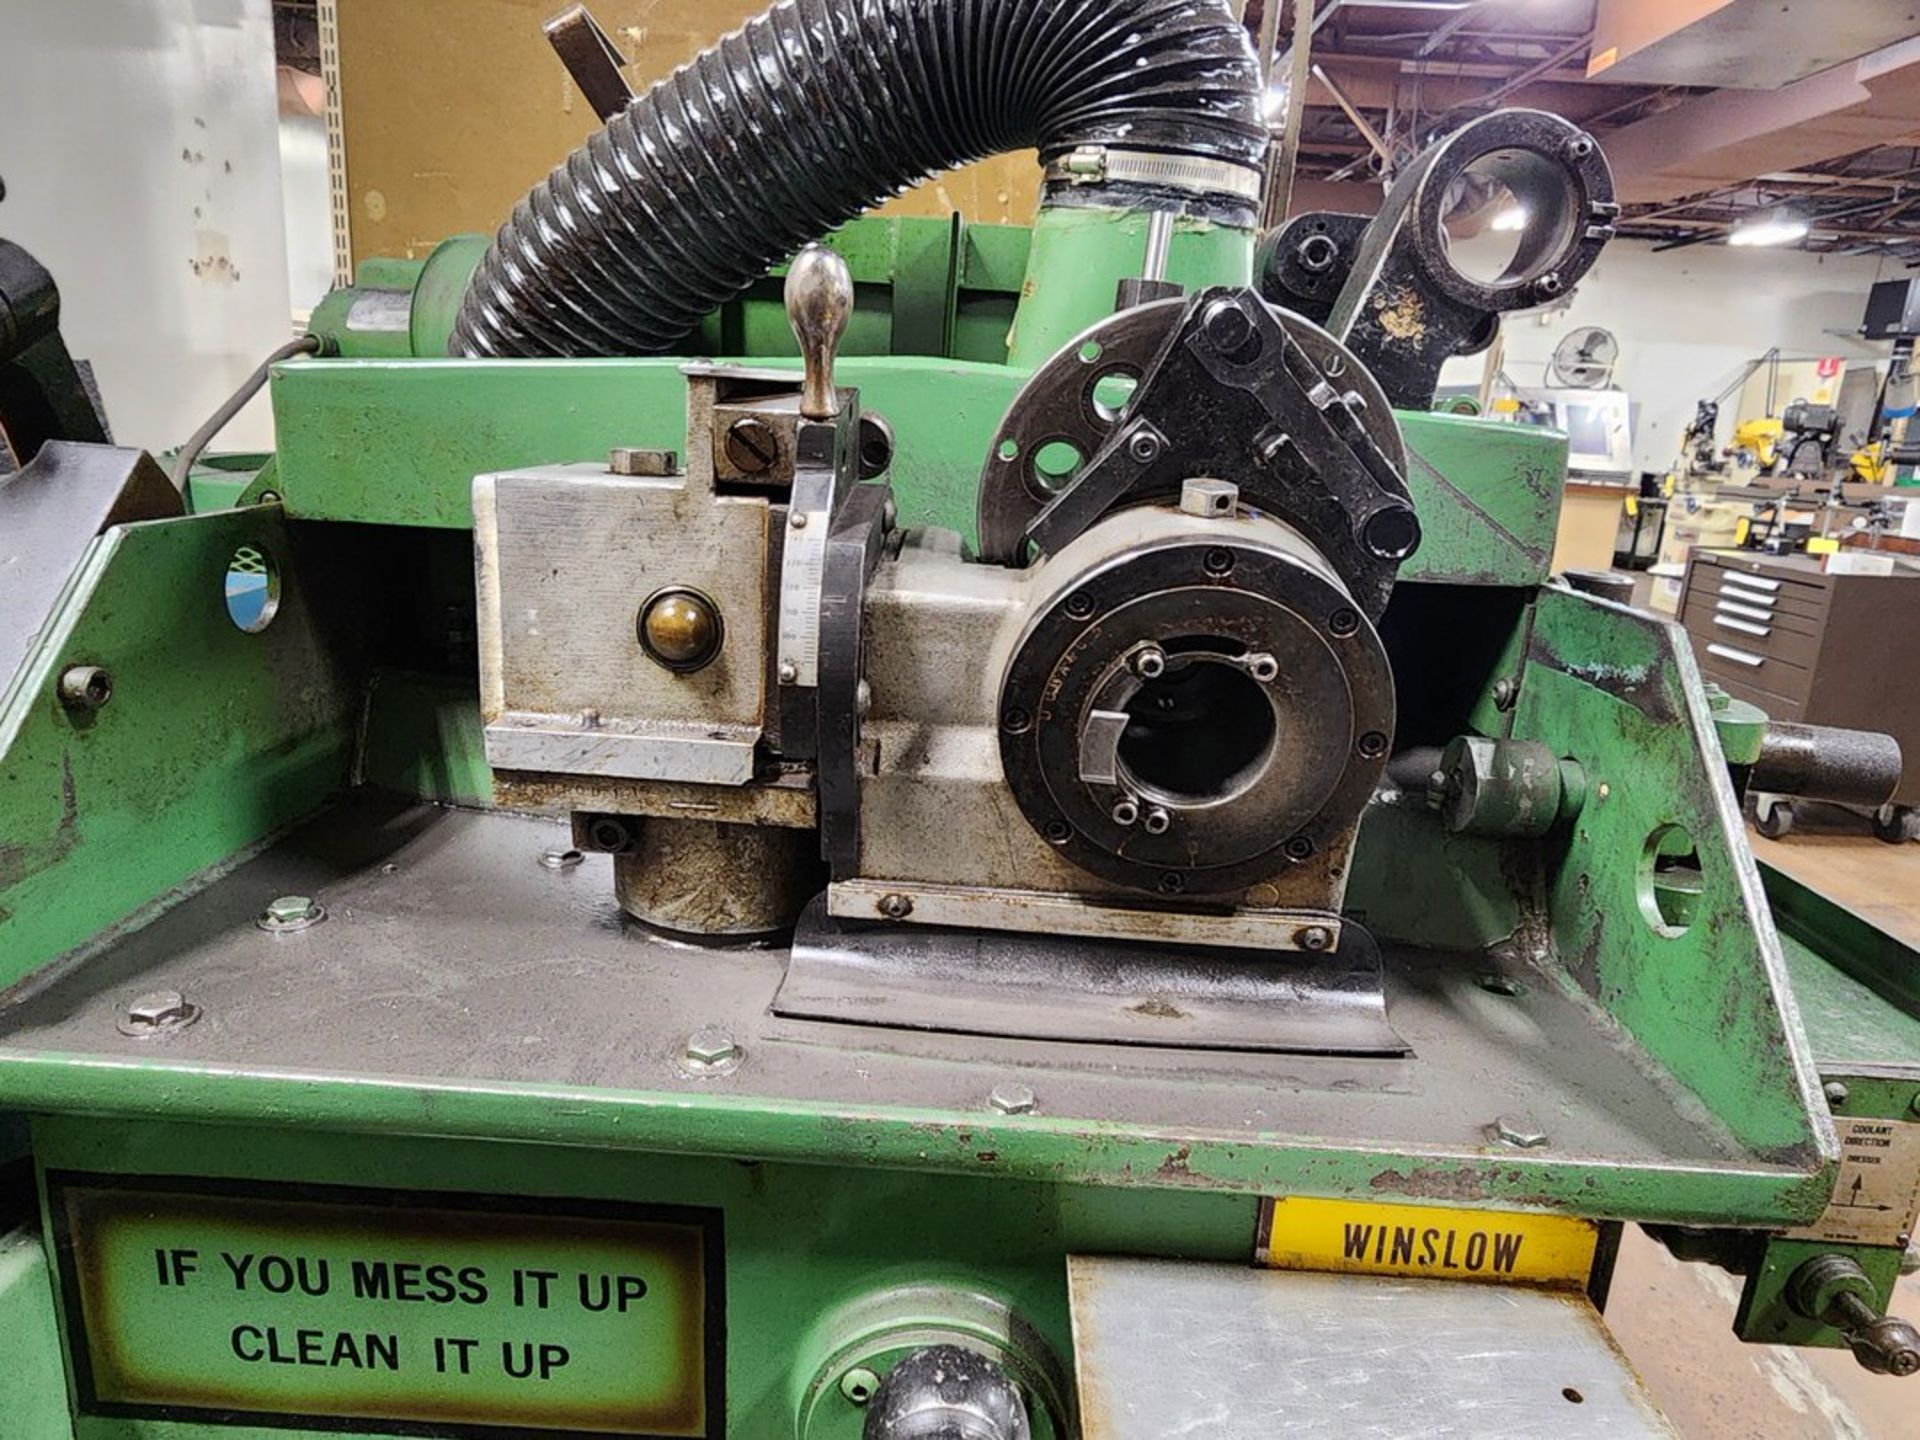 G&L Tool Cutter Grinder W/ Tooling; Dust Collector & Material Cabinet - Image 14 of 34